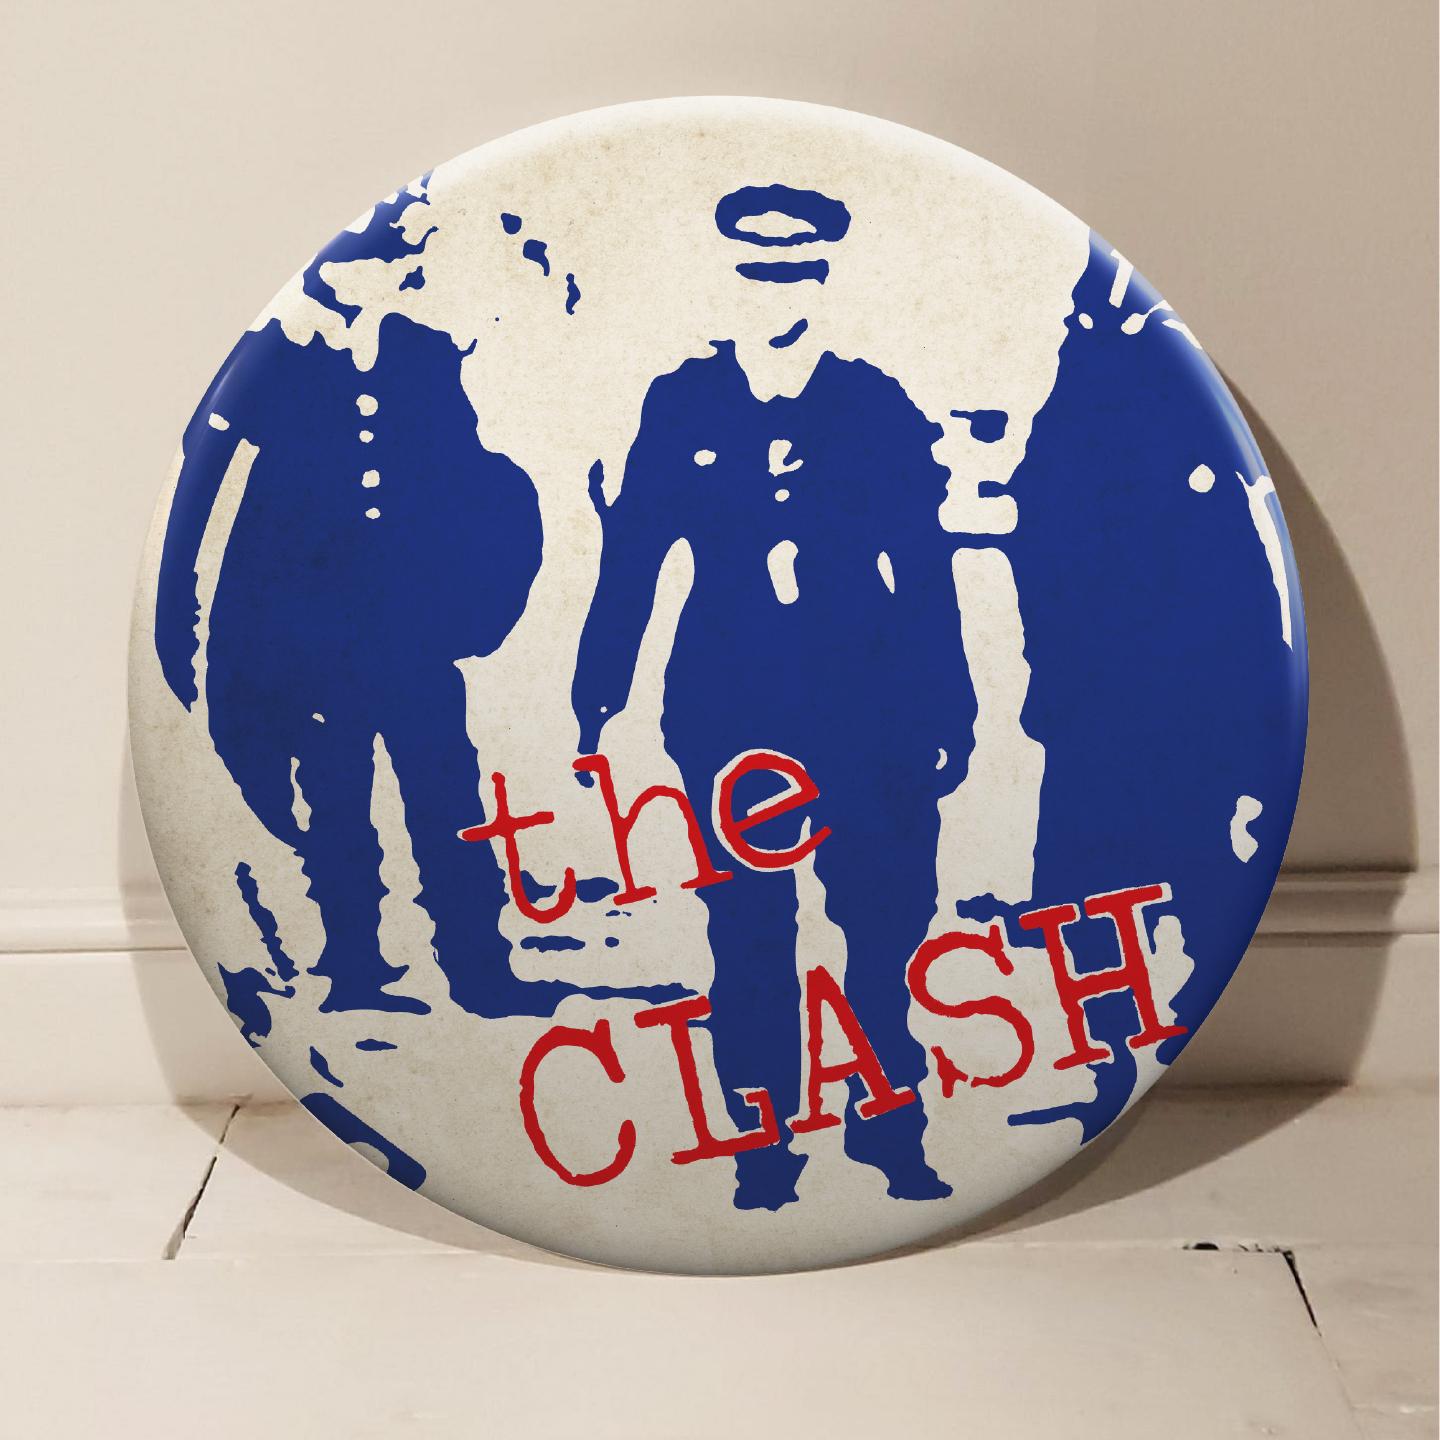 The Clash "Police And Thieves" Giant Handmade 3D Vintage Button - Mixed Media Art by Tony Dennis